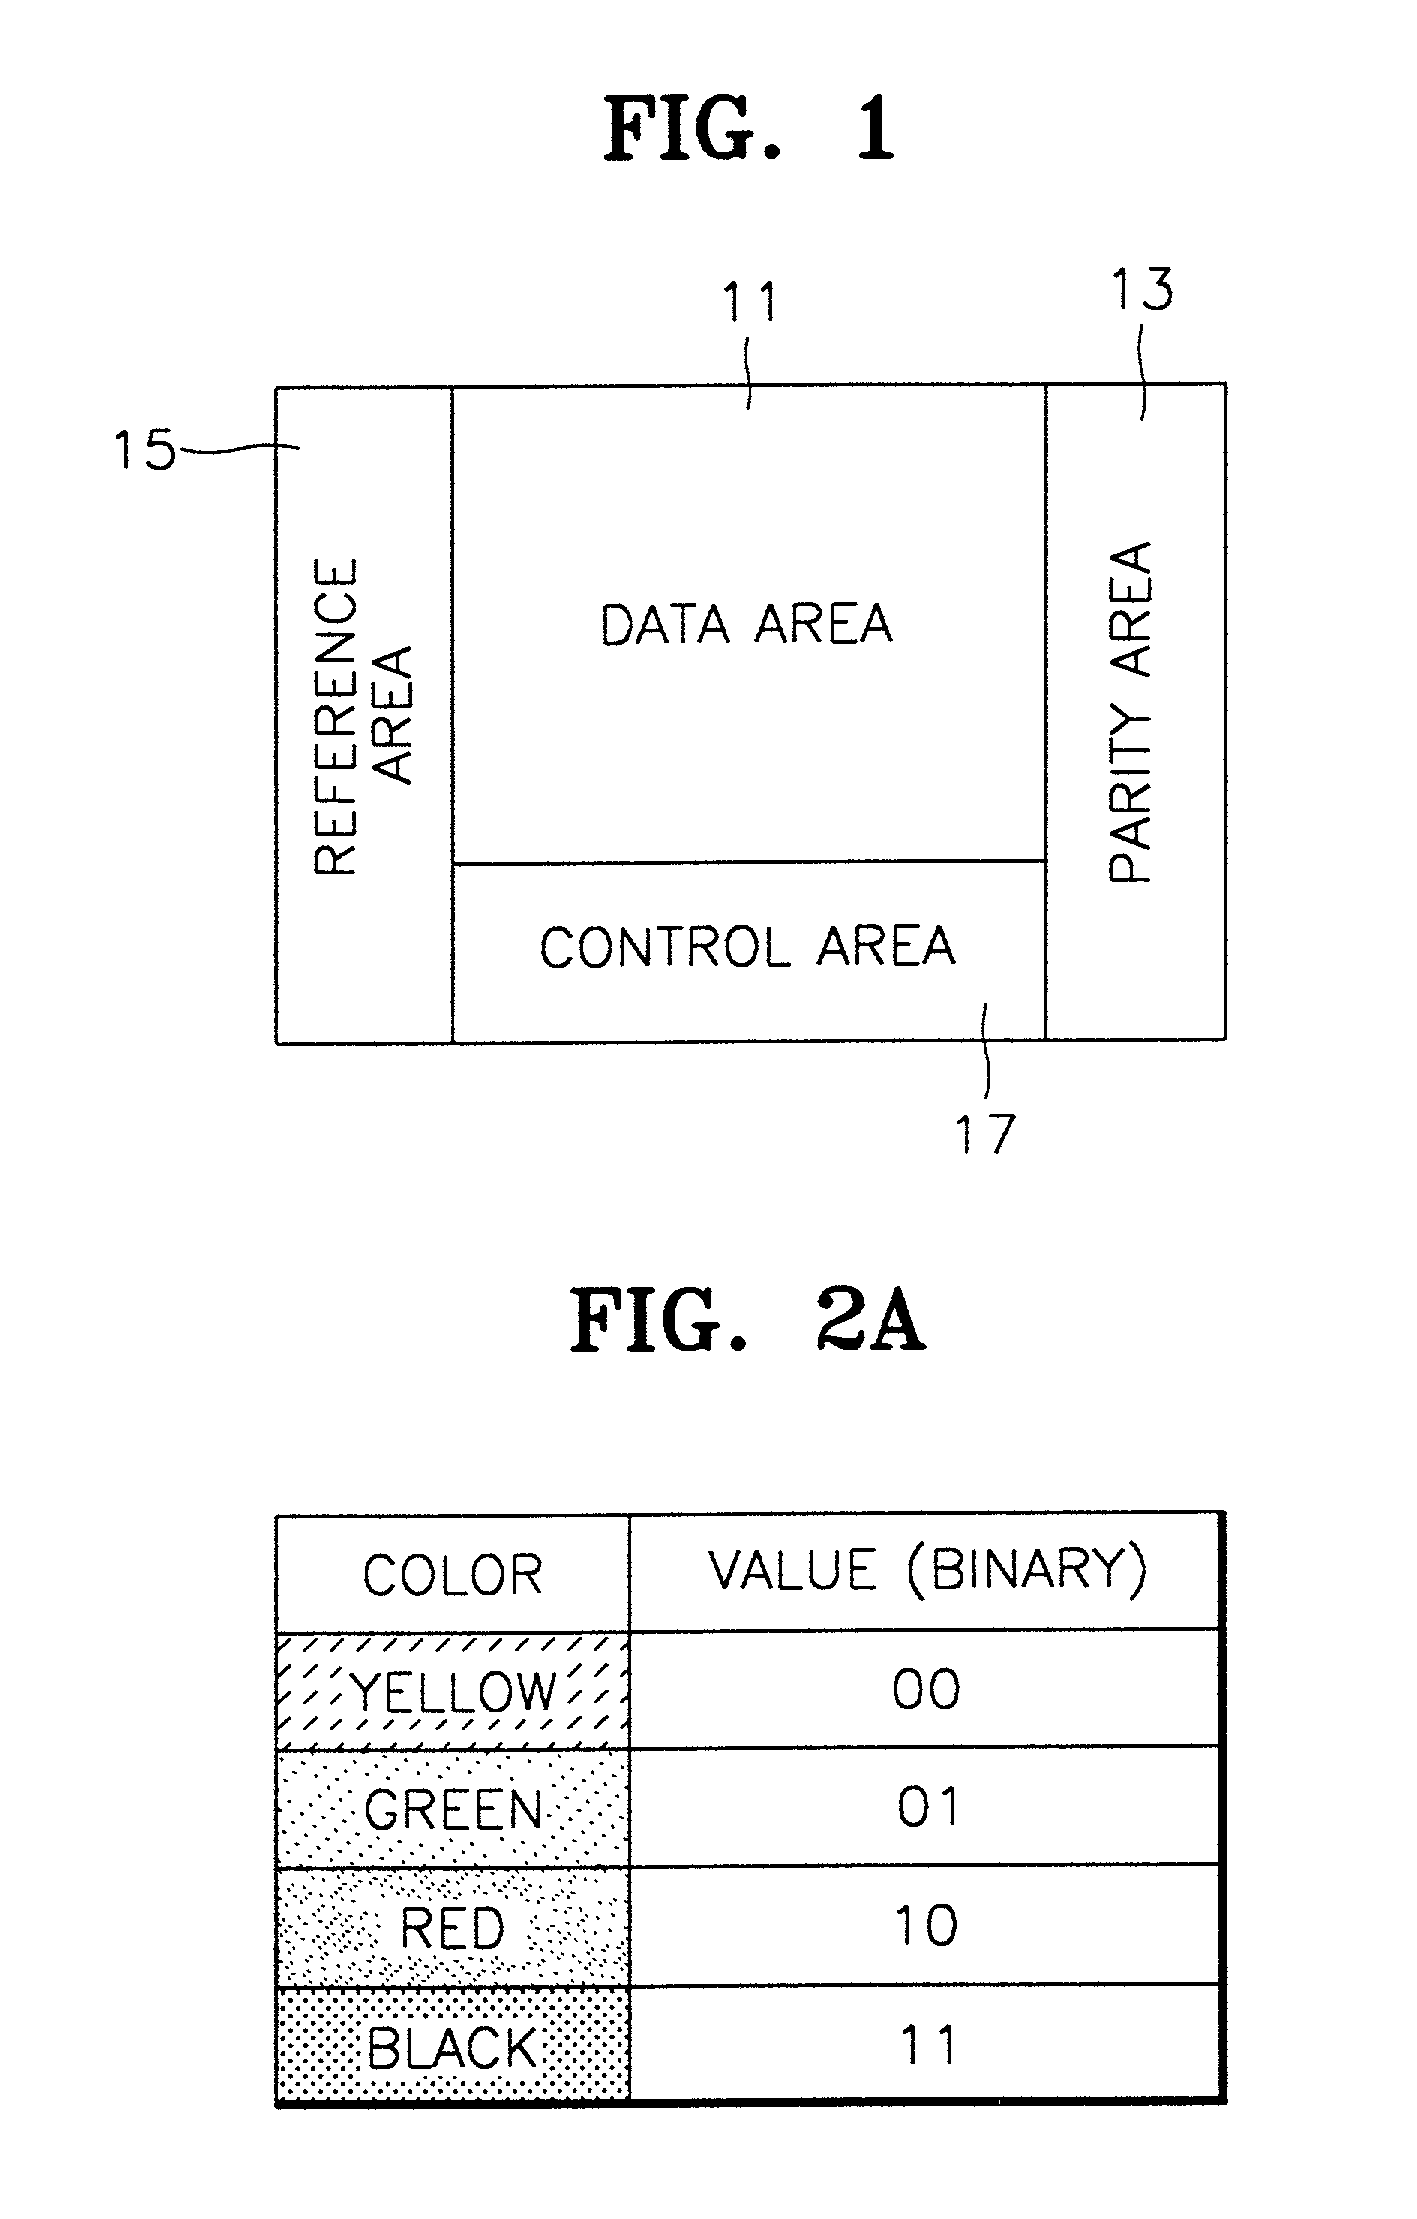 Machine readable code image and method of encoding and decoding the same